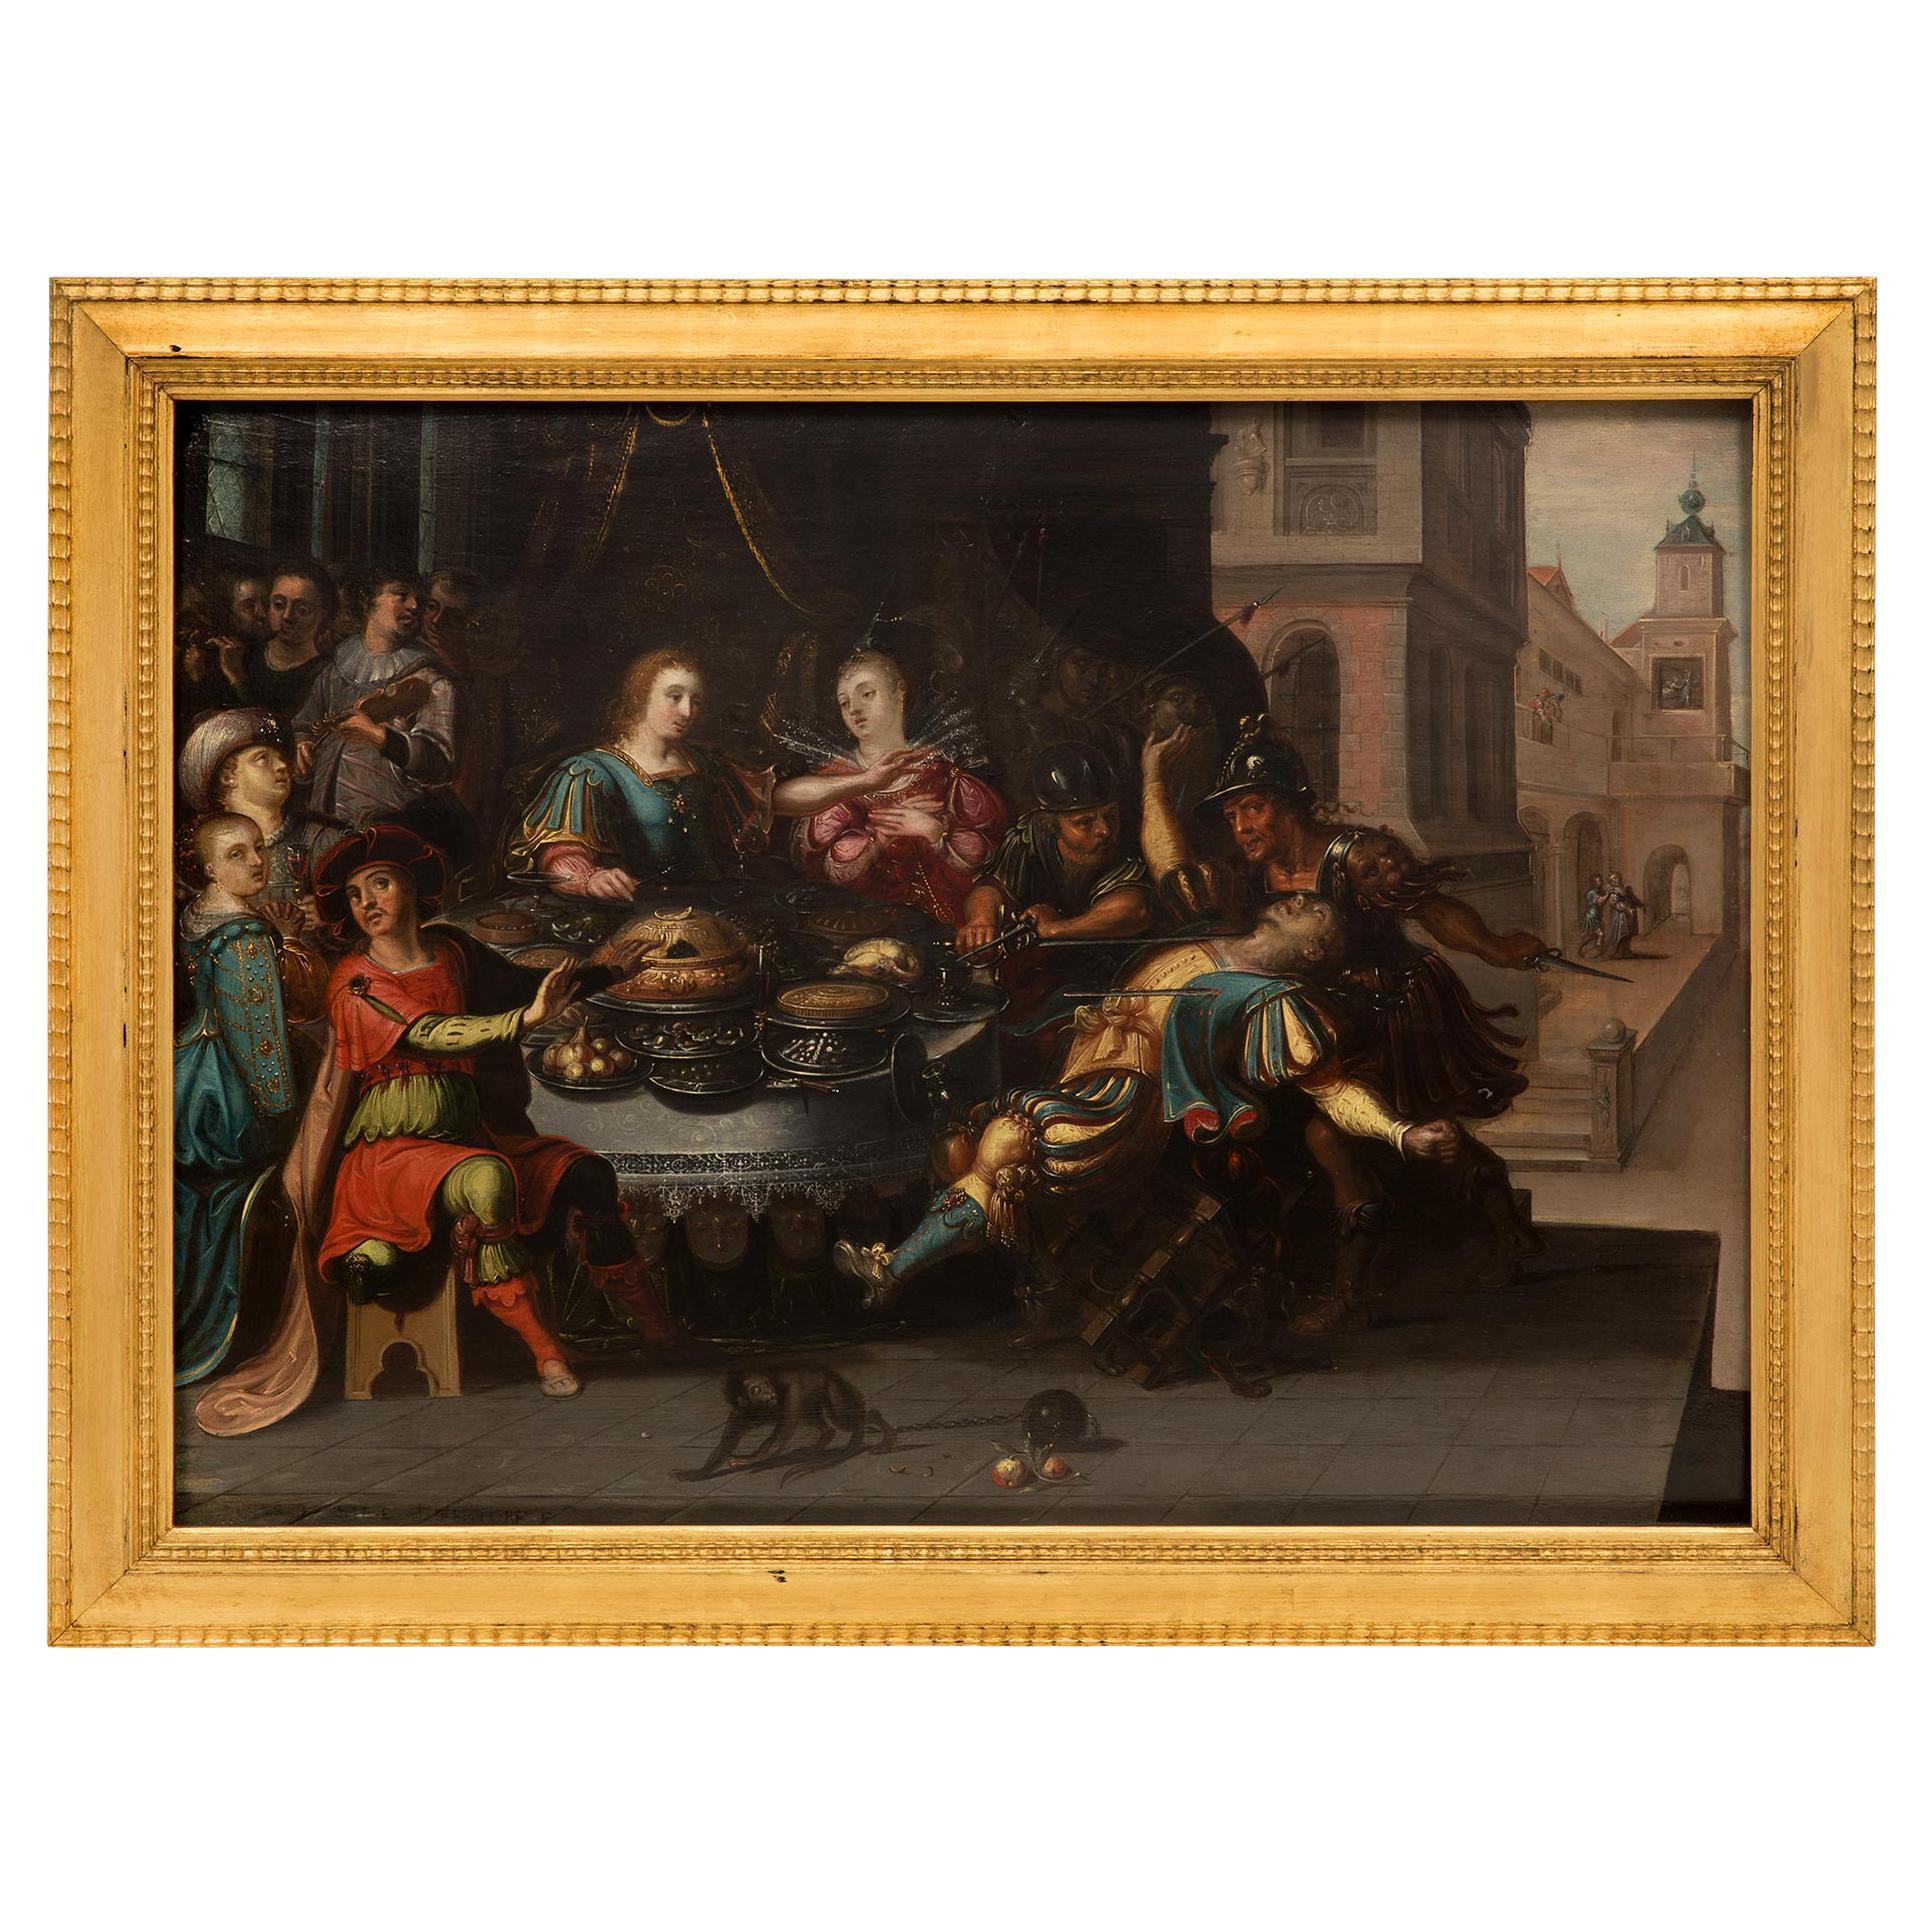 Dutch 17th Century Oil on Wood Painting in the Manner of Frans Francken